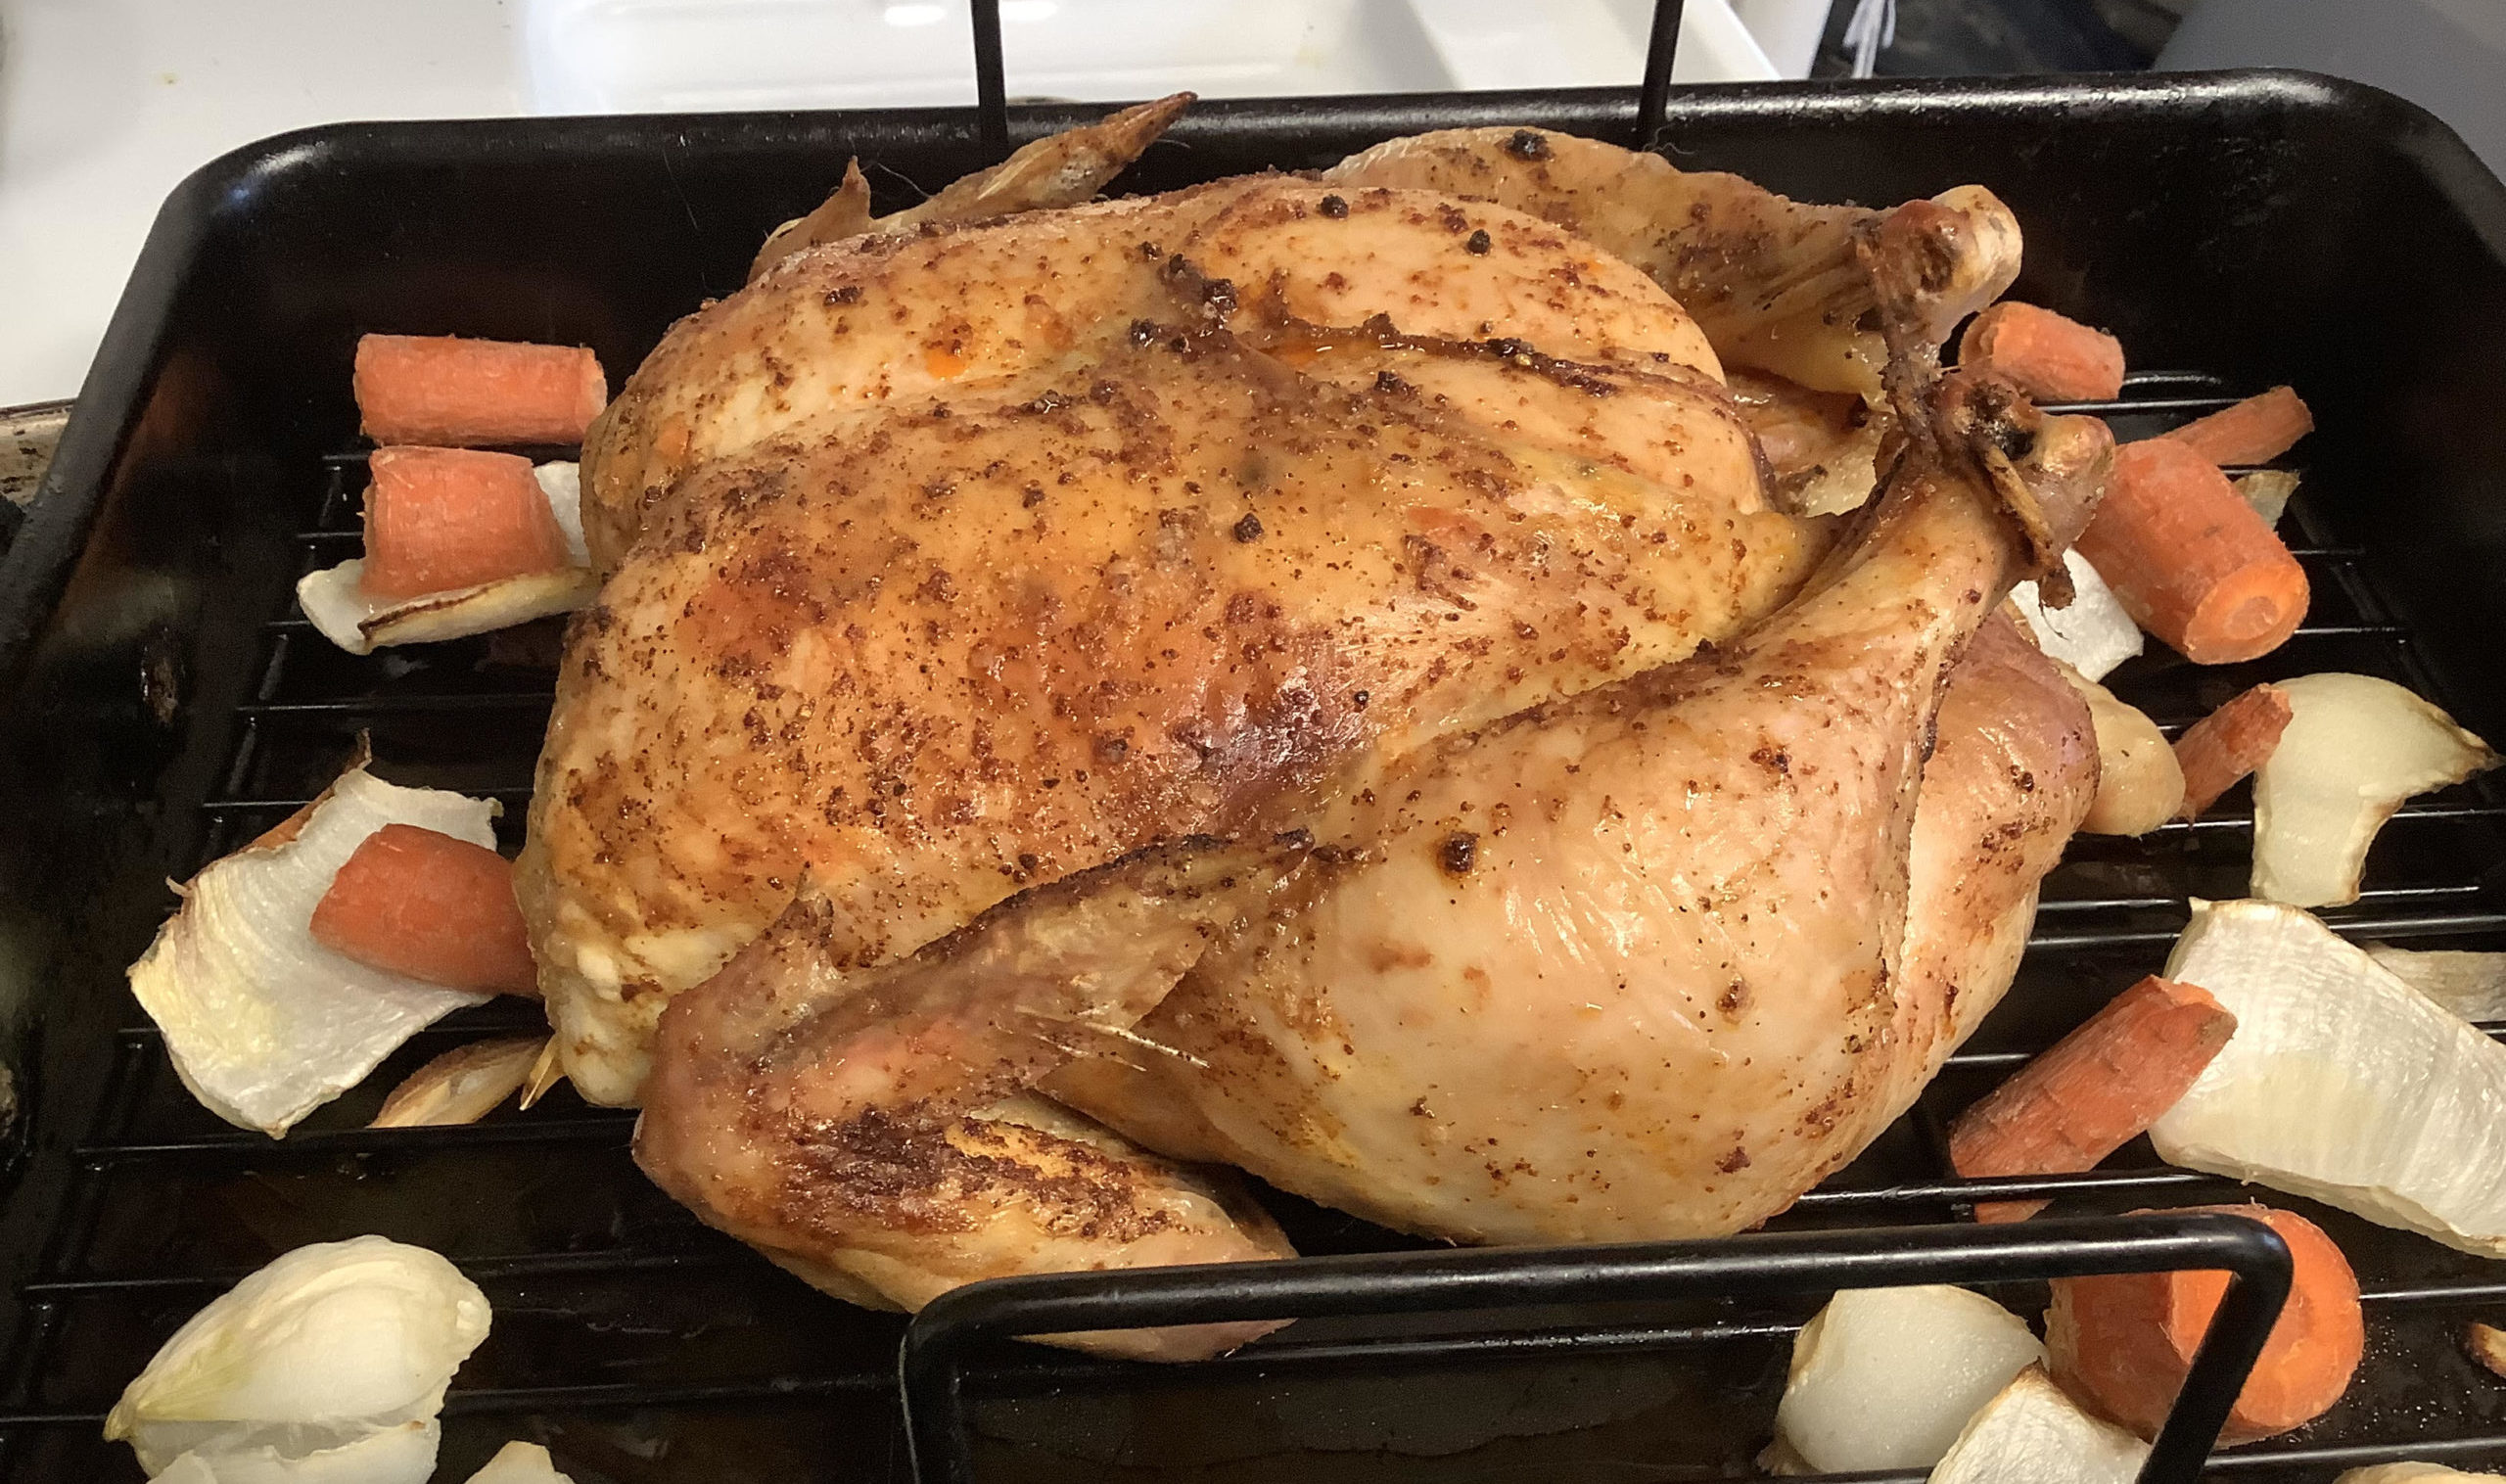 Whole Roasted Chicken
